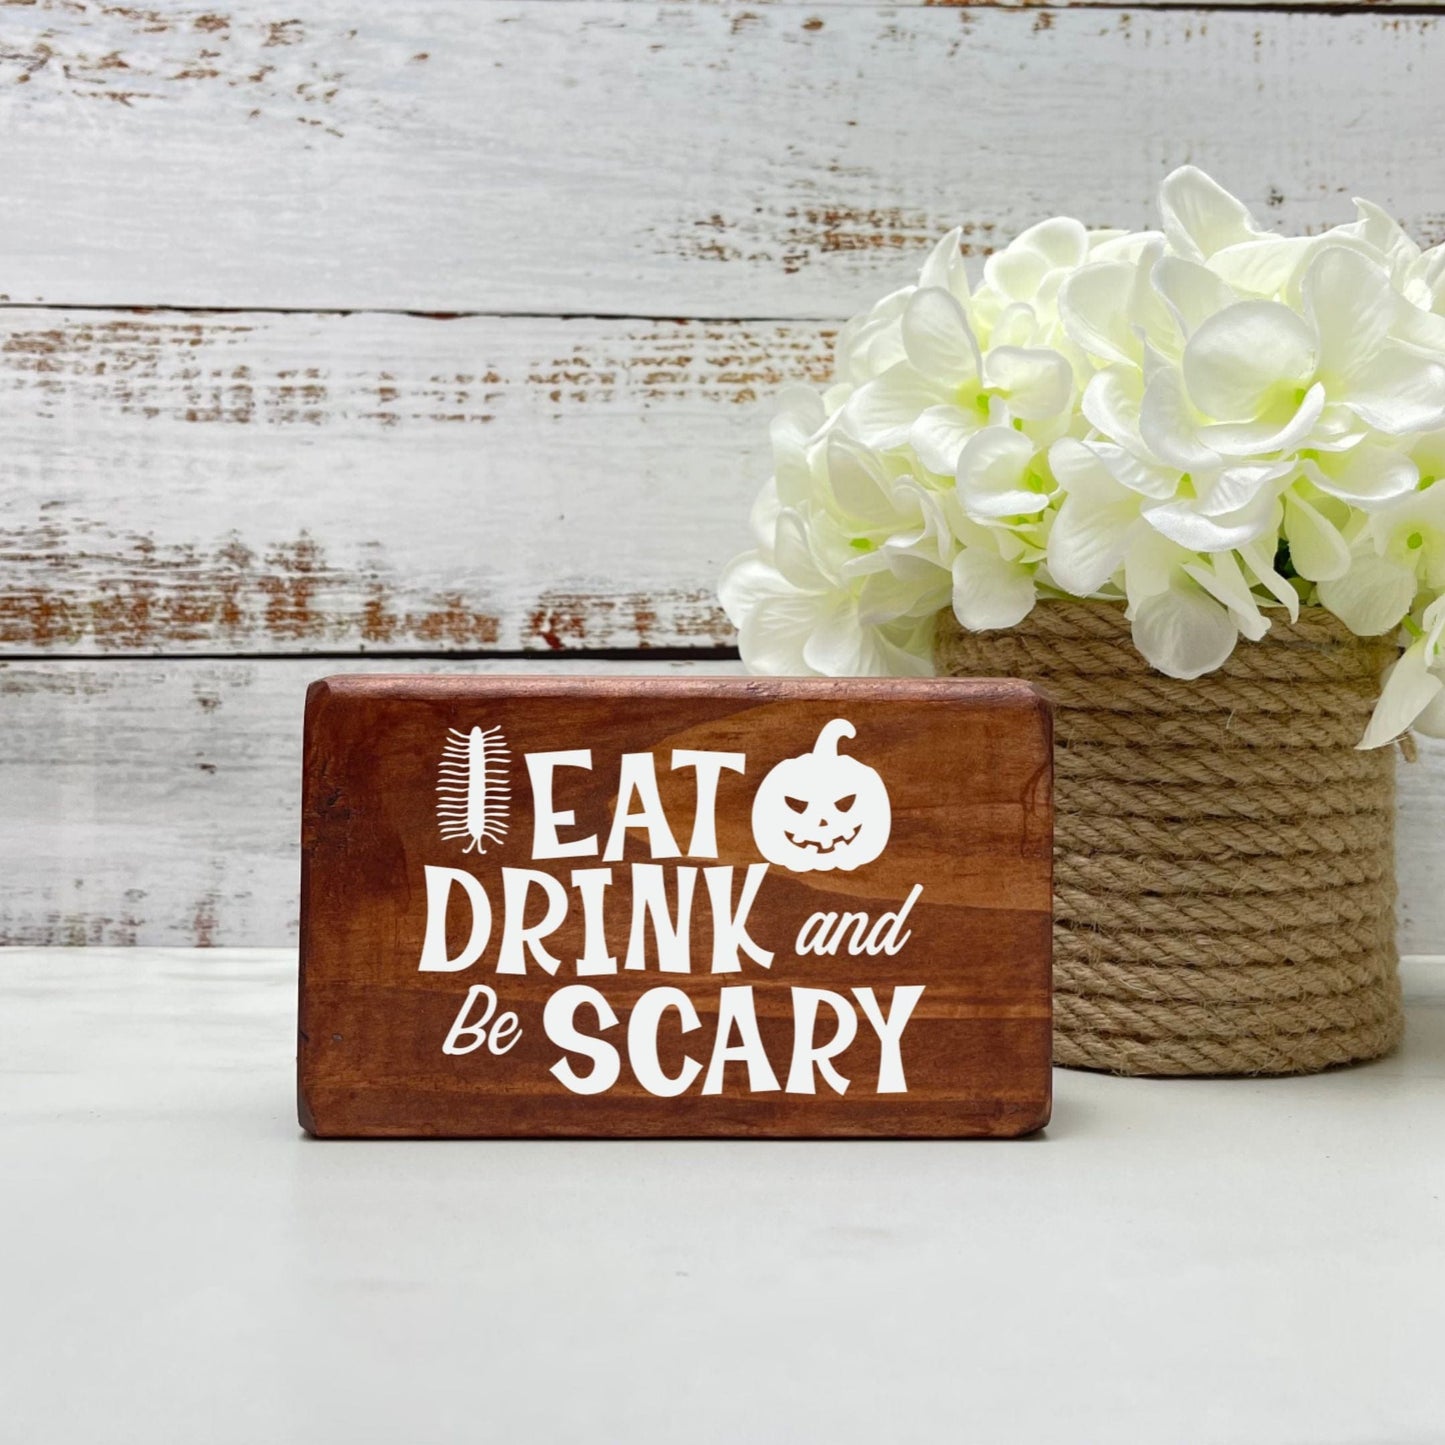 Eat drink and be scary Sign, Halloween Wood Sign, Halloween Home Decor, Spooky Decor